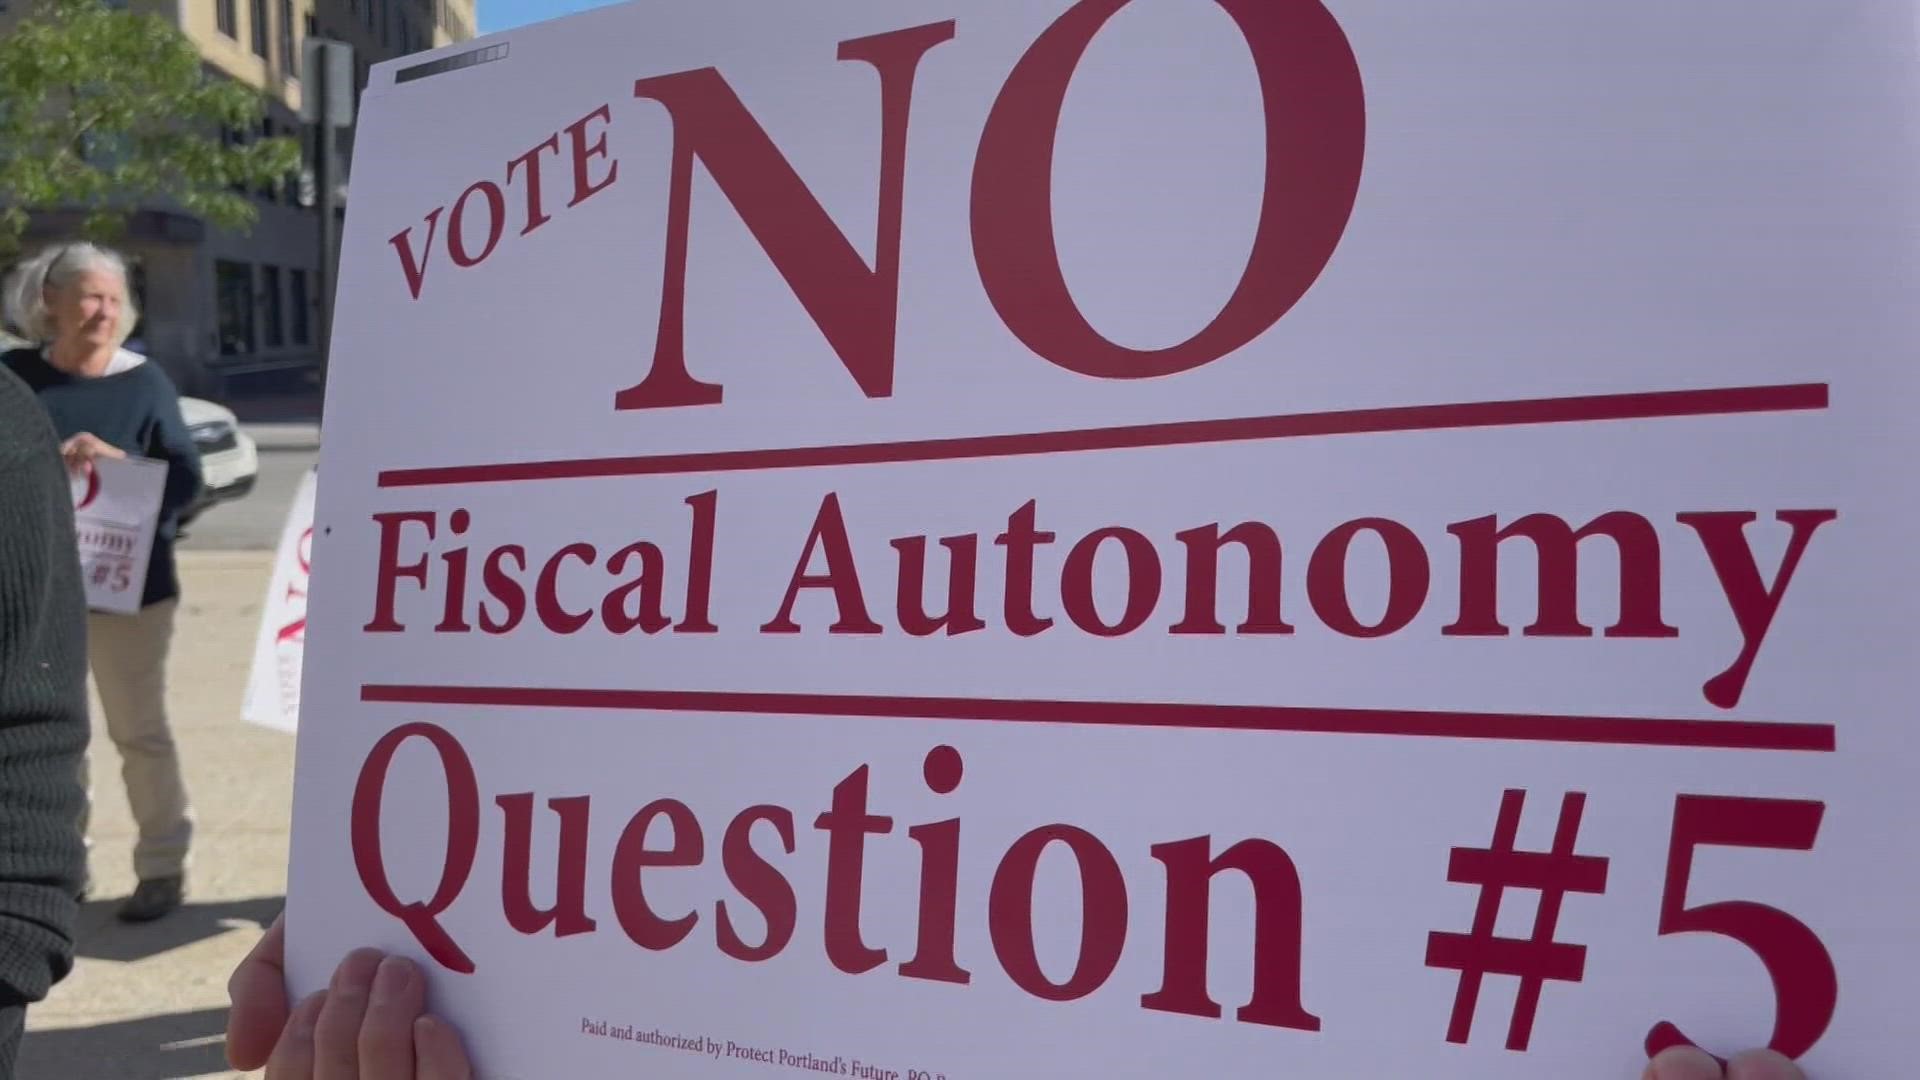 On Thursday, the group of Portland residents held a news conference explaining why they think Question 5 is a bad idea.